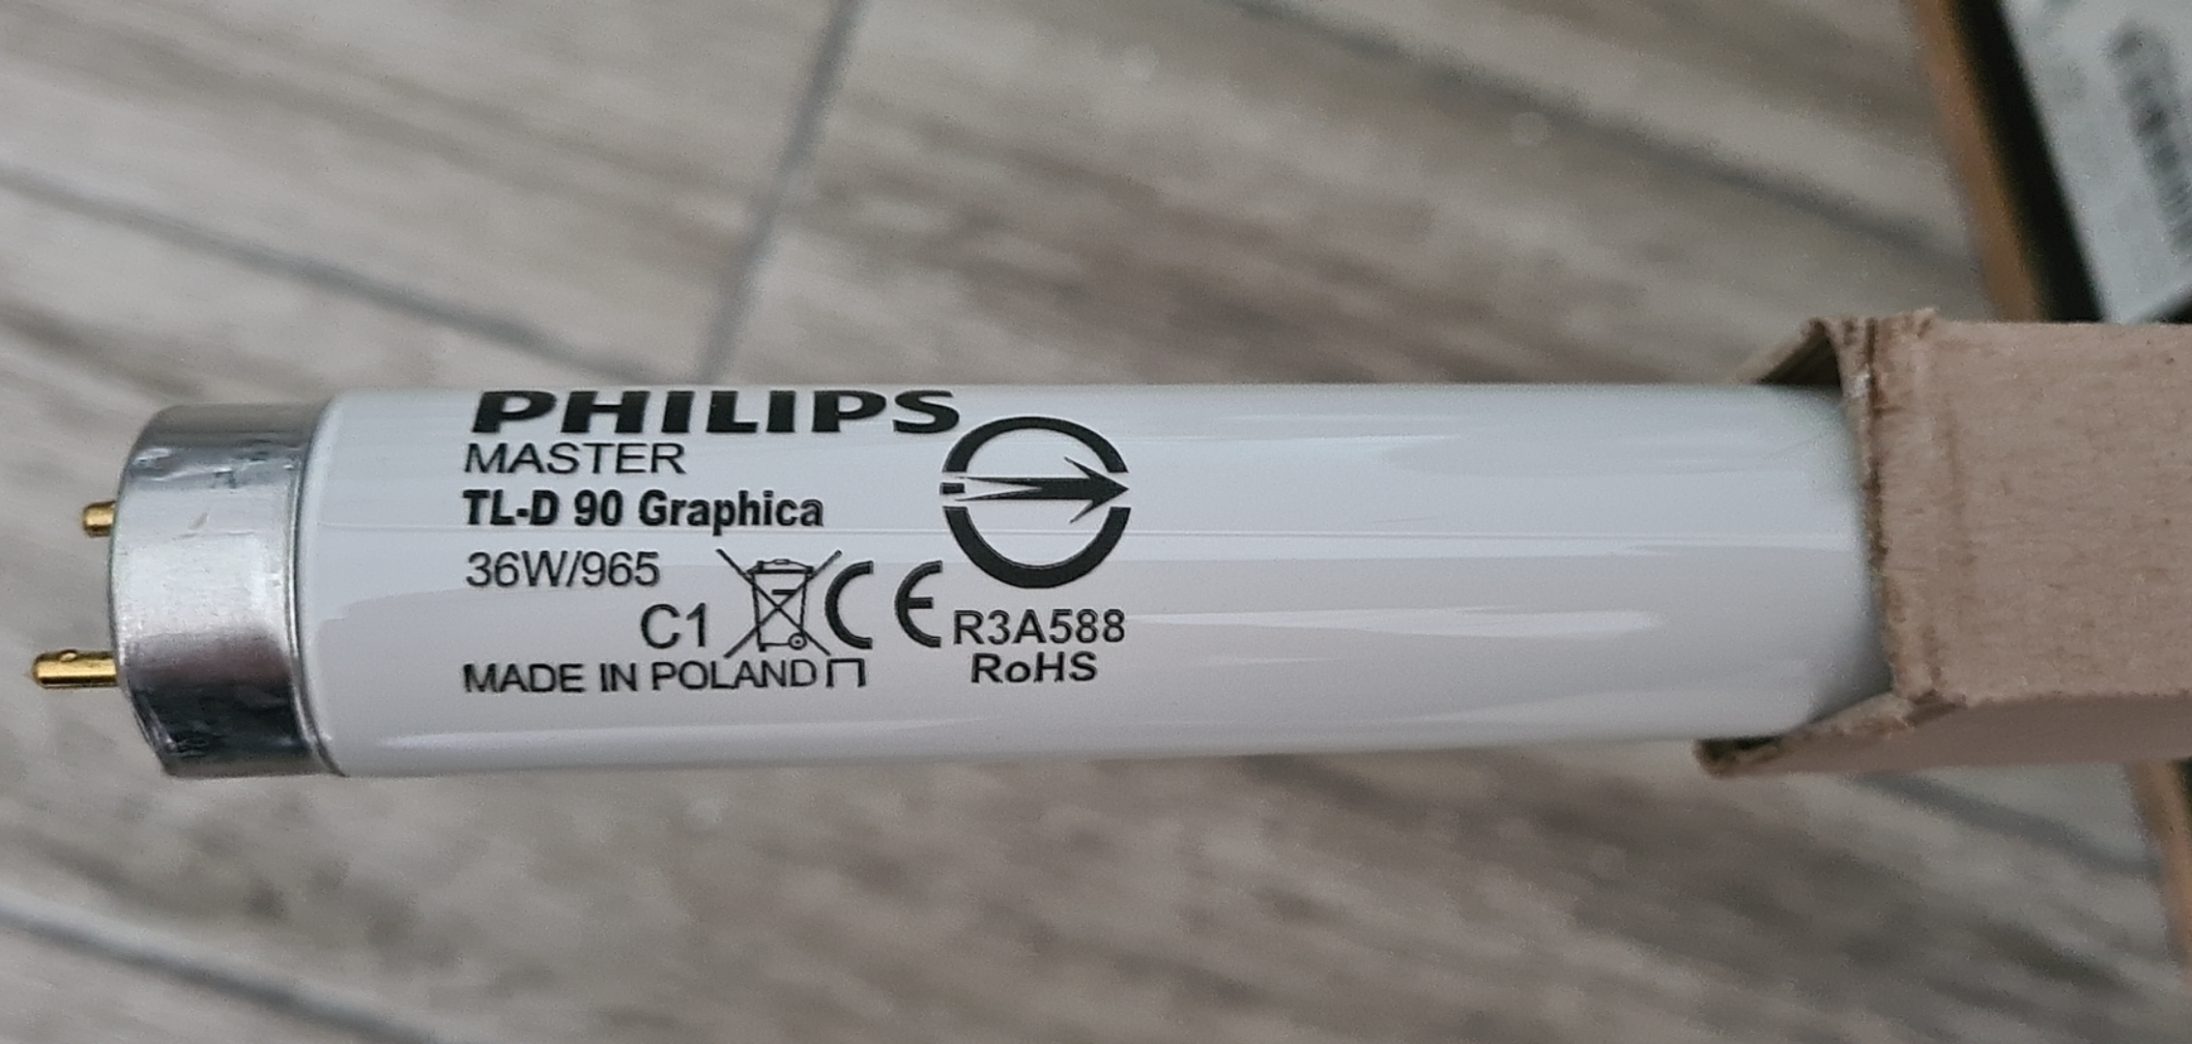 d65-philips-tl-d-90-graphica-36w-965